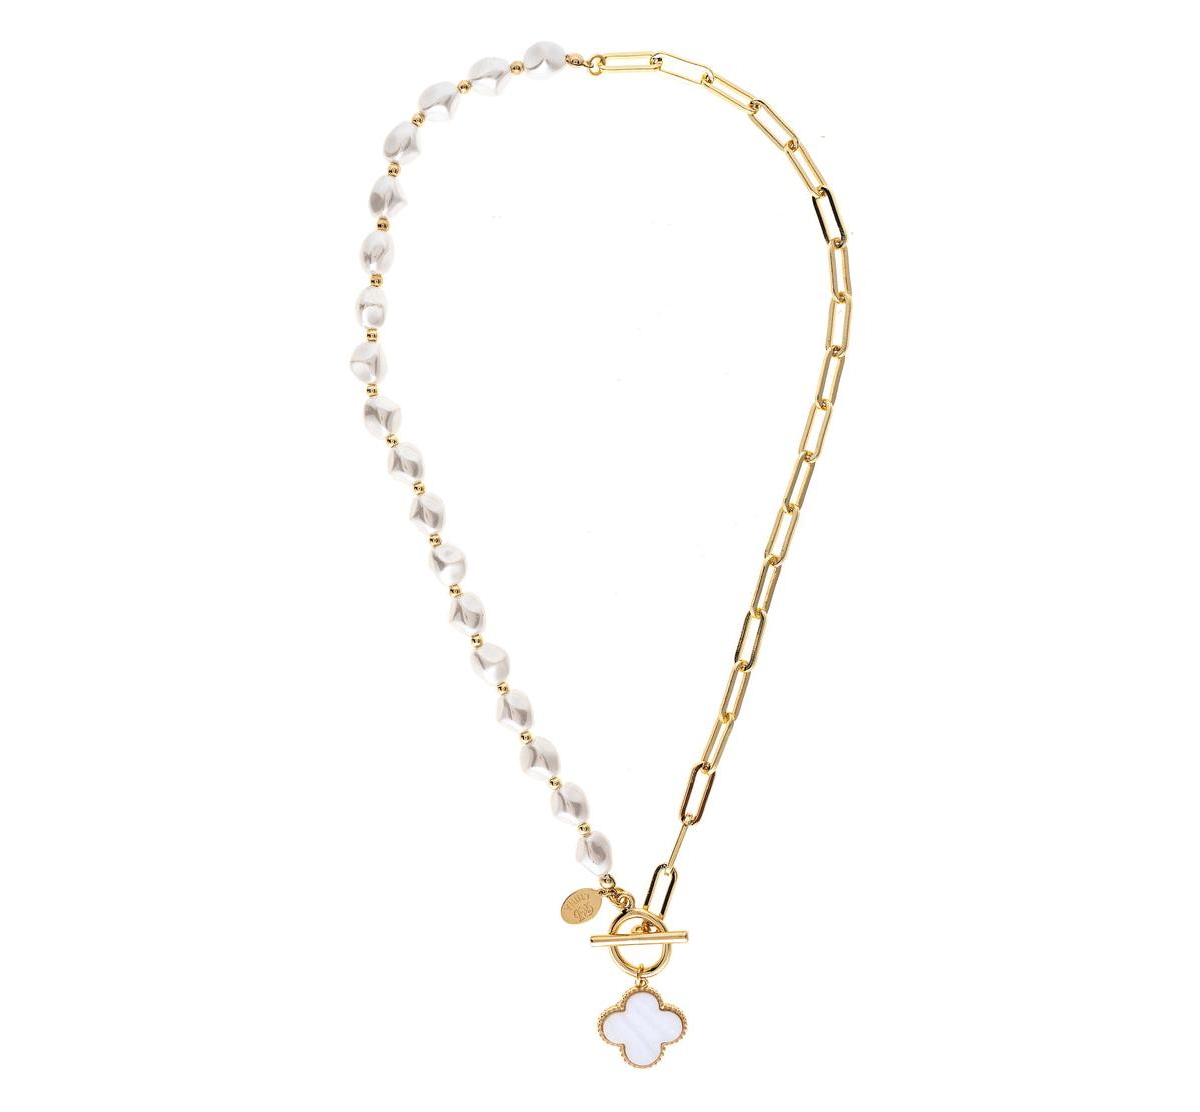 Half Pearl + Half Paperclip Chain Necklace with Clover Charm - Gold with white mother of pearl